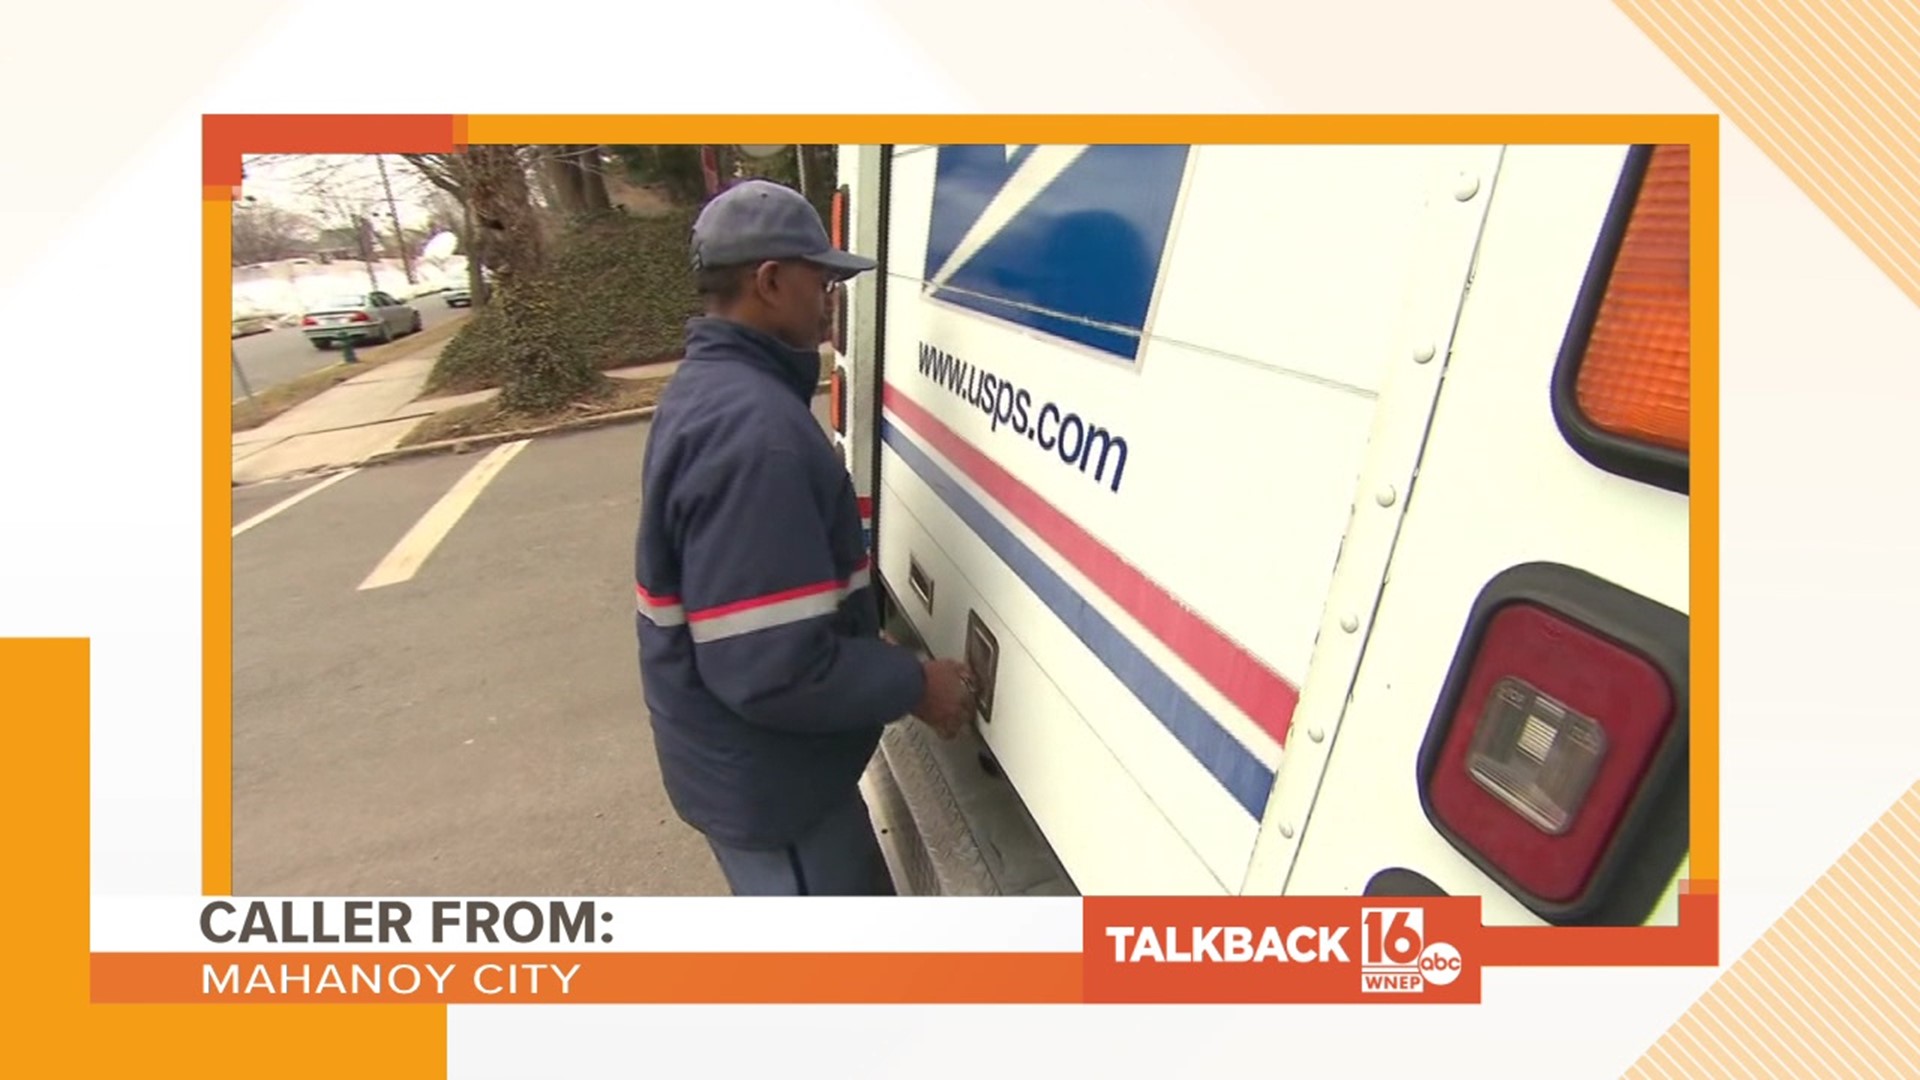 Several callers give their opinion about the postal service experiencing delays, including a caller from Effort saying to, "buy made in America only."